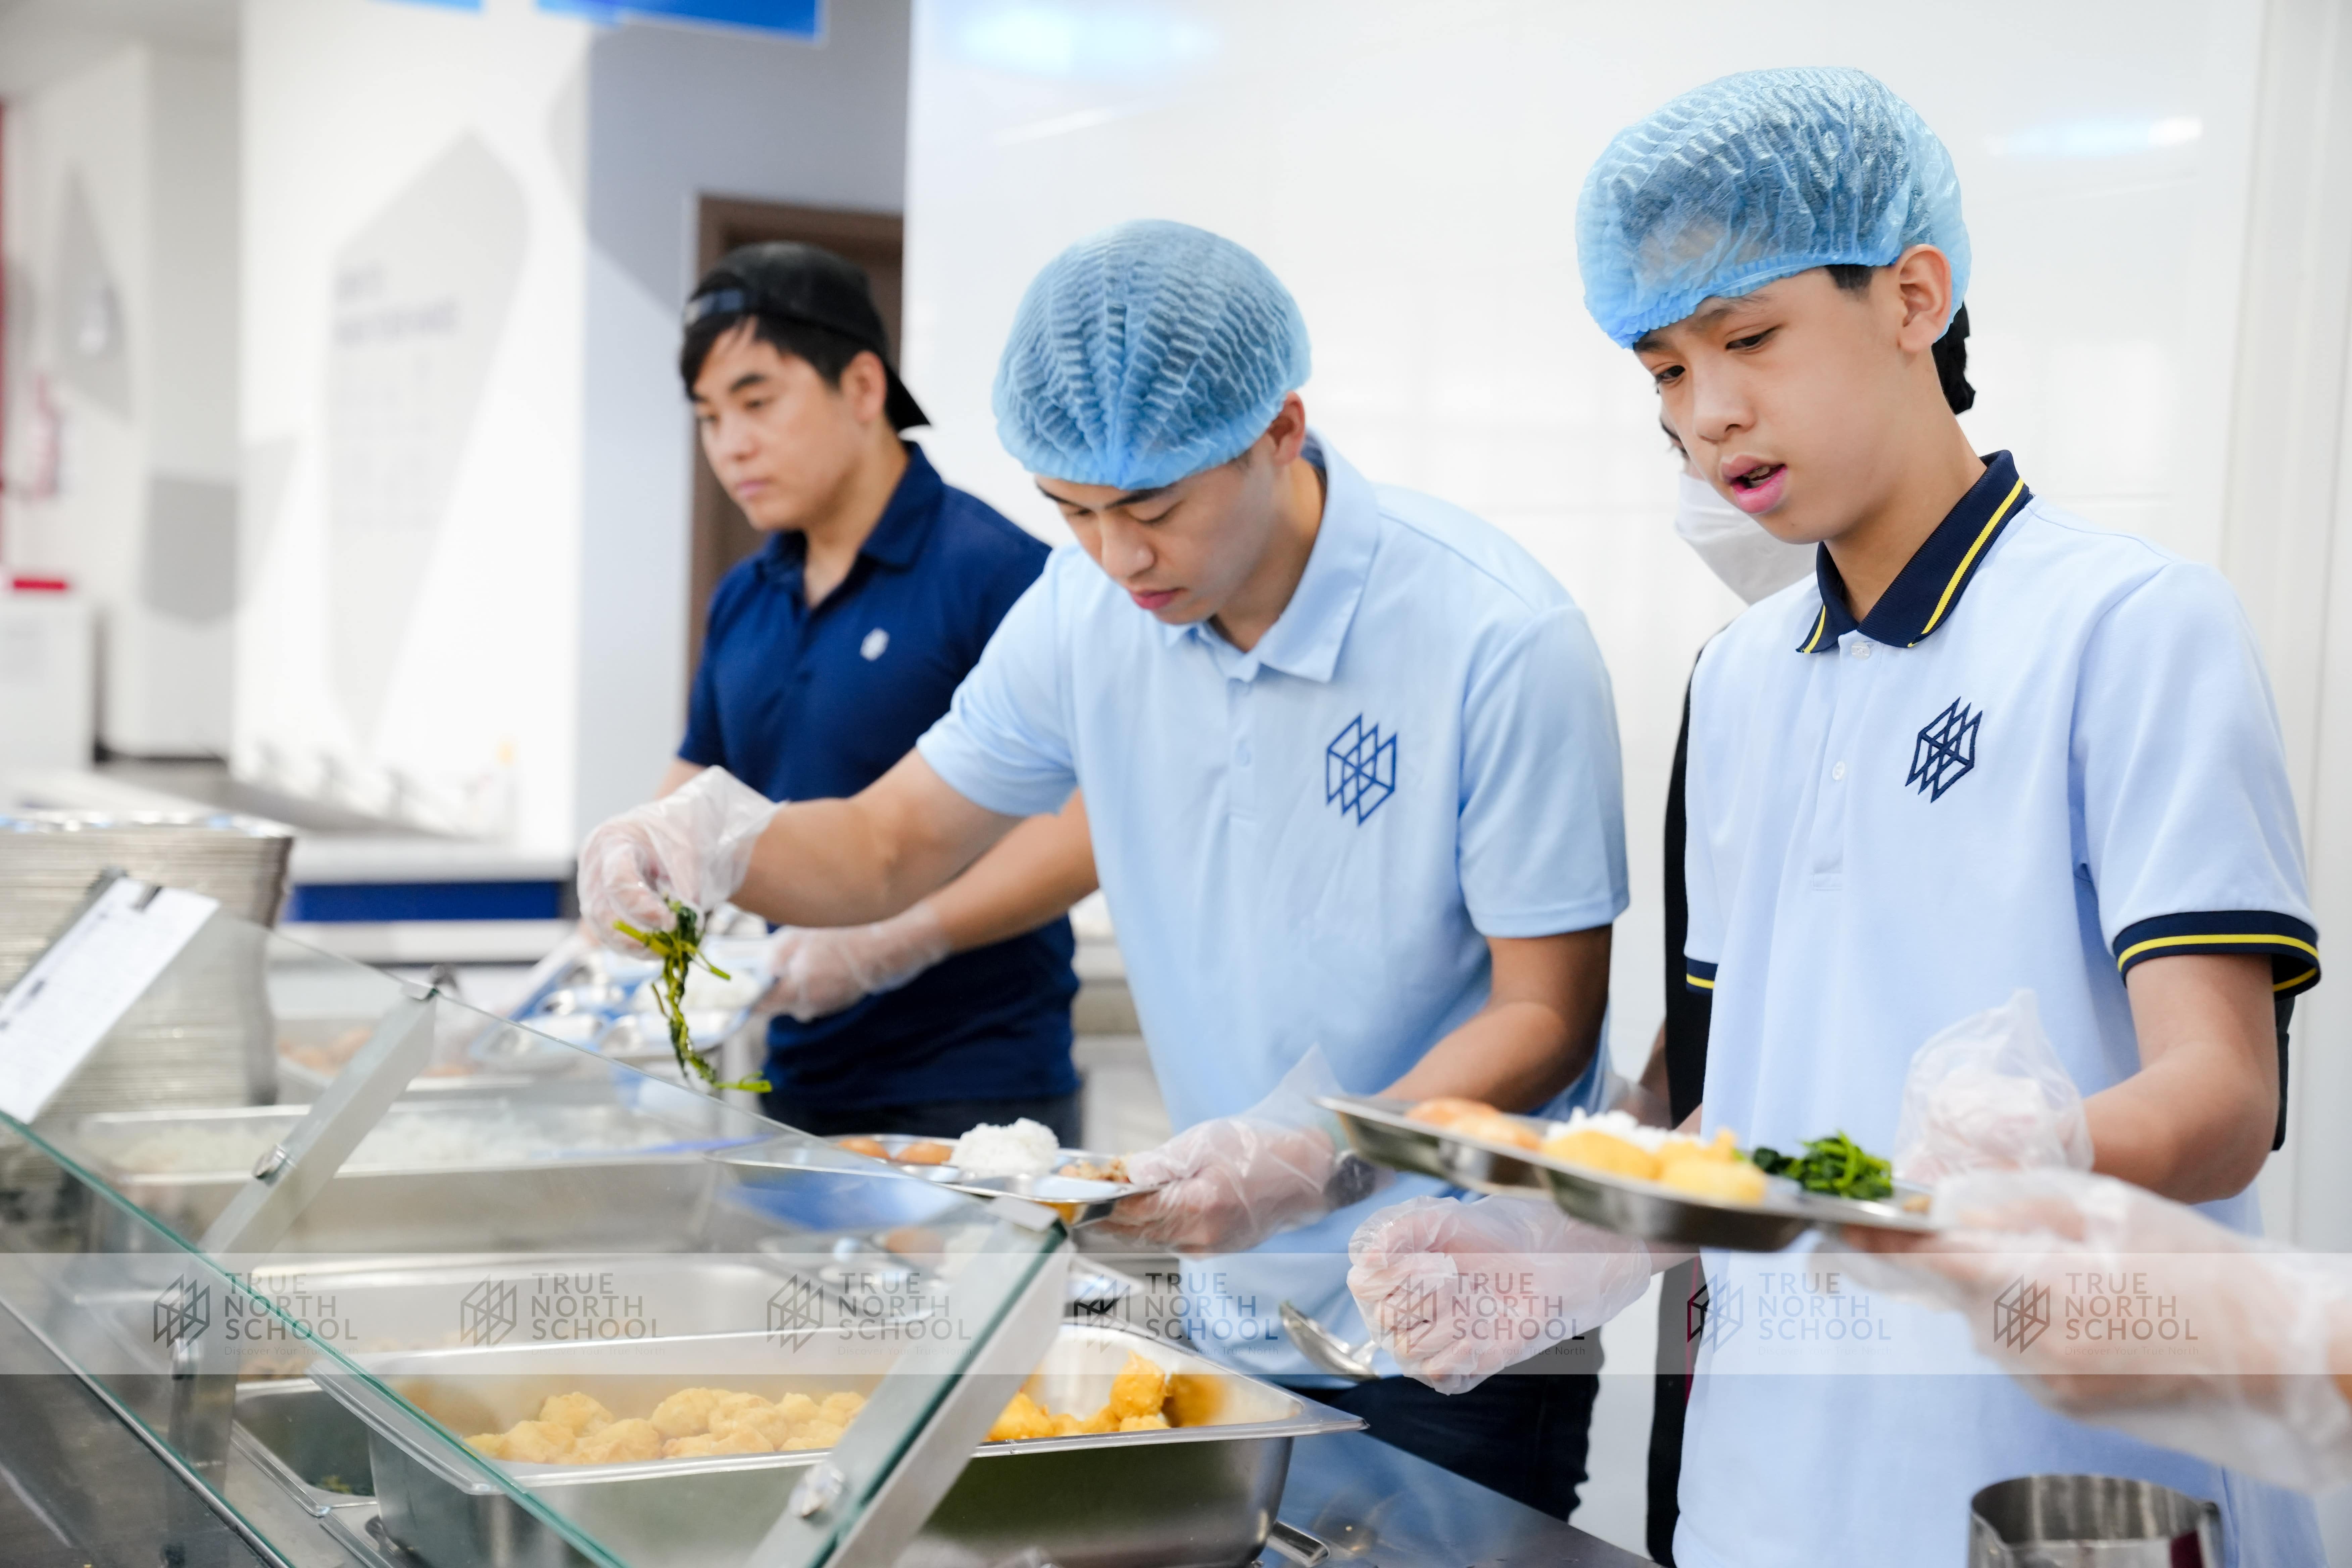 TNS men served lunch to women on Women’s Day